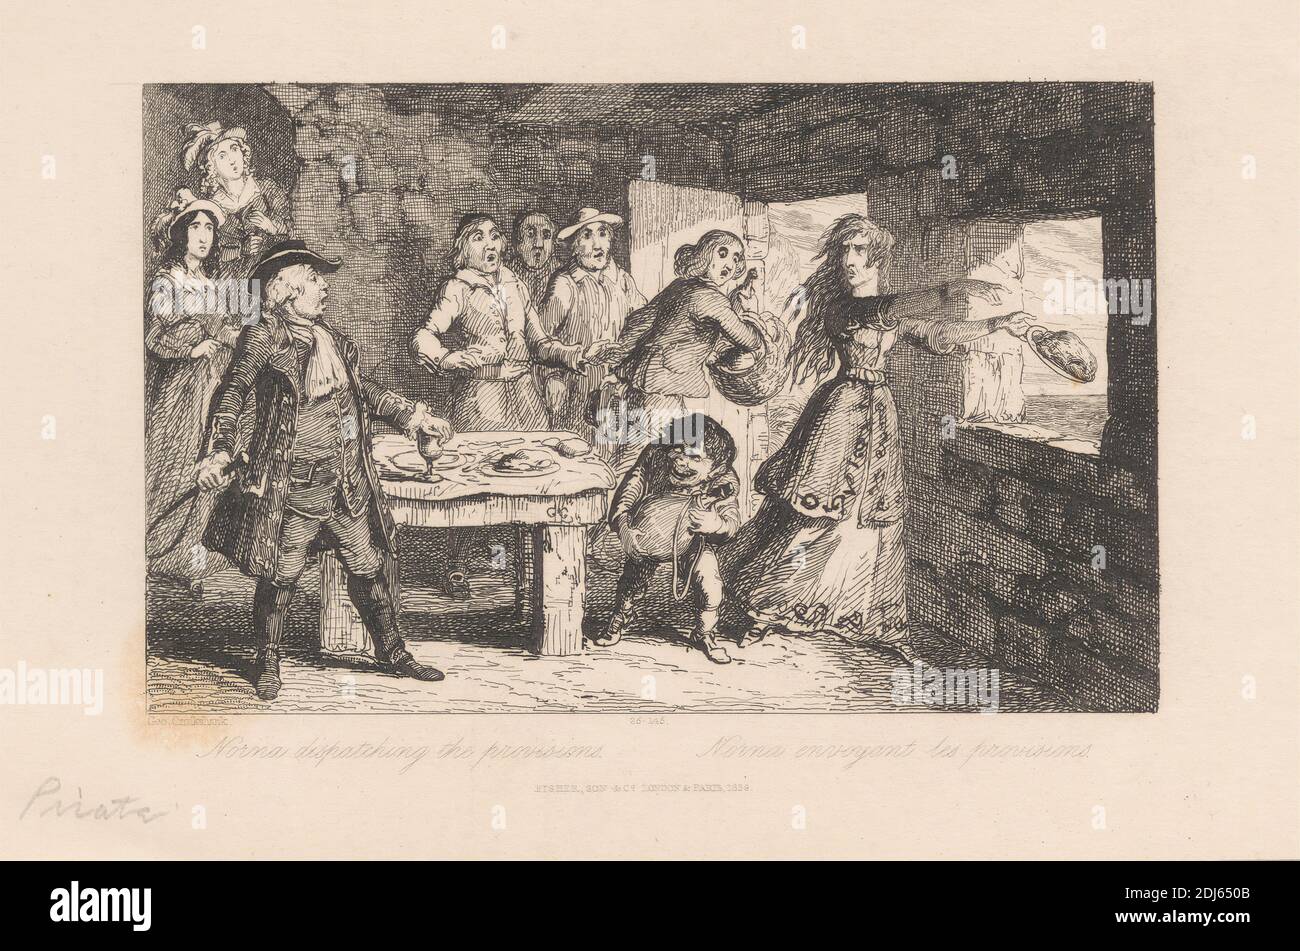 Norma Dispatching the Provisions, Print made by George Cruikshank, 1792–1878, British, 1838, Etching on medium, slightly textured, cream wove paper Stock Photo